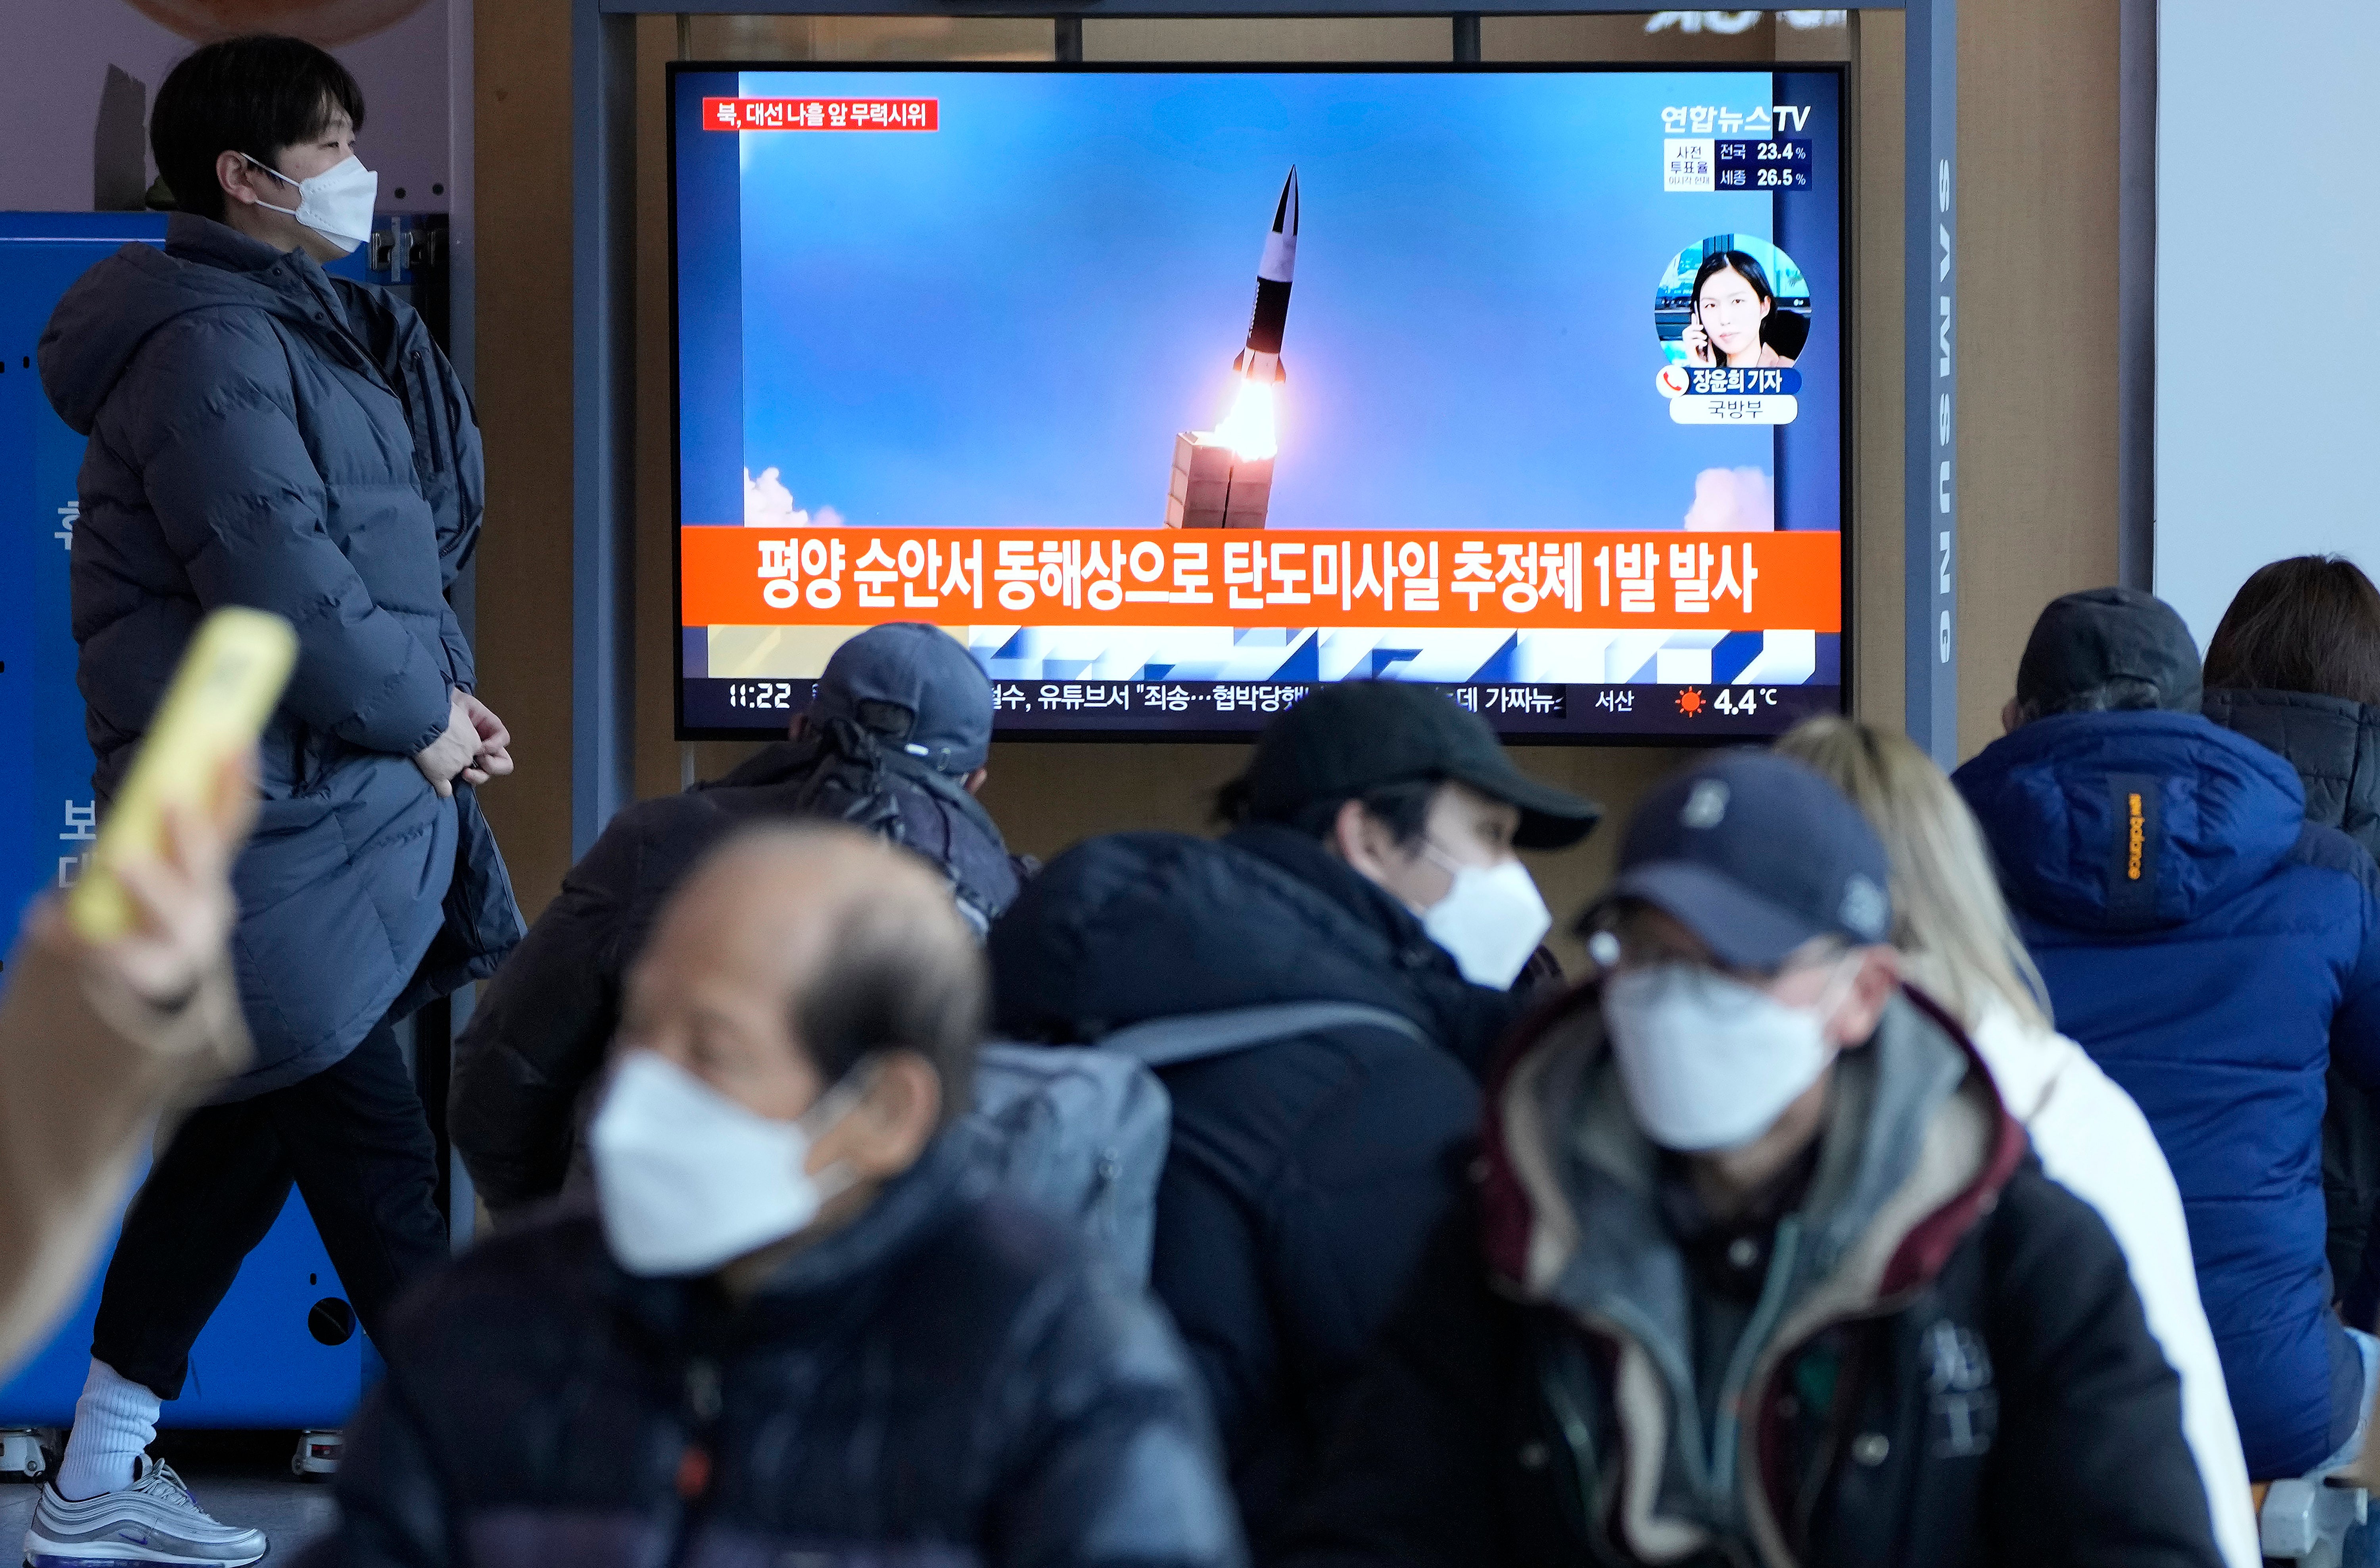 File: People watch a TV showing a file image of North Korea’s missile launch during a news programme at the Seoul Railway Station in South Korea